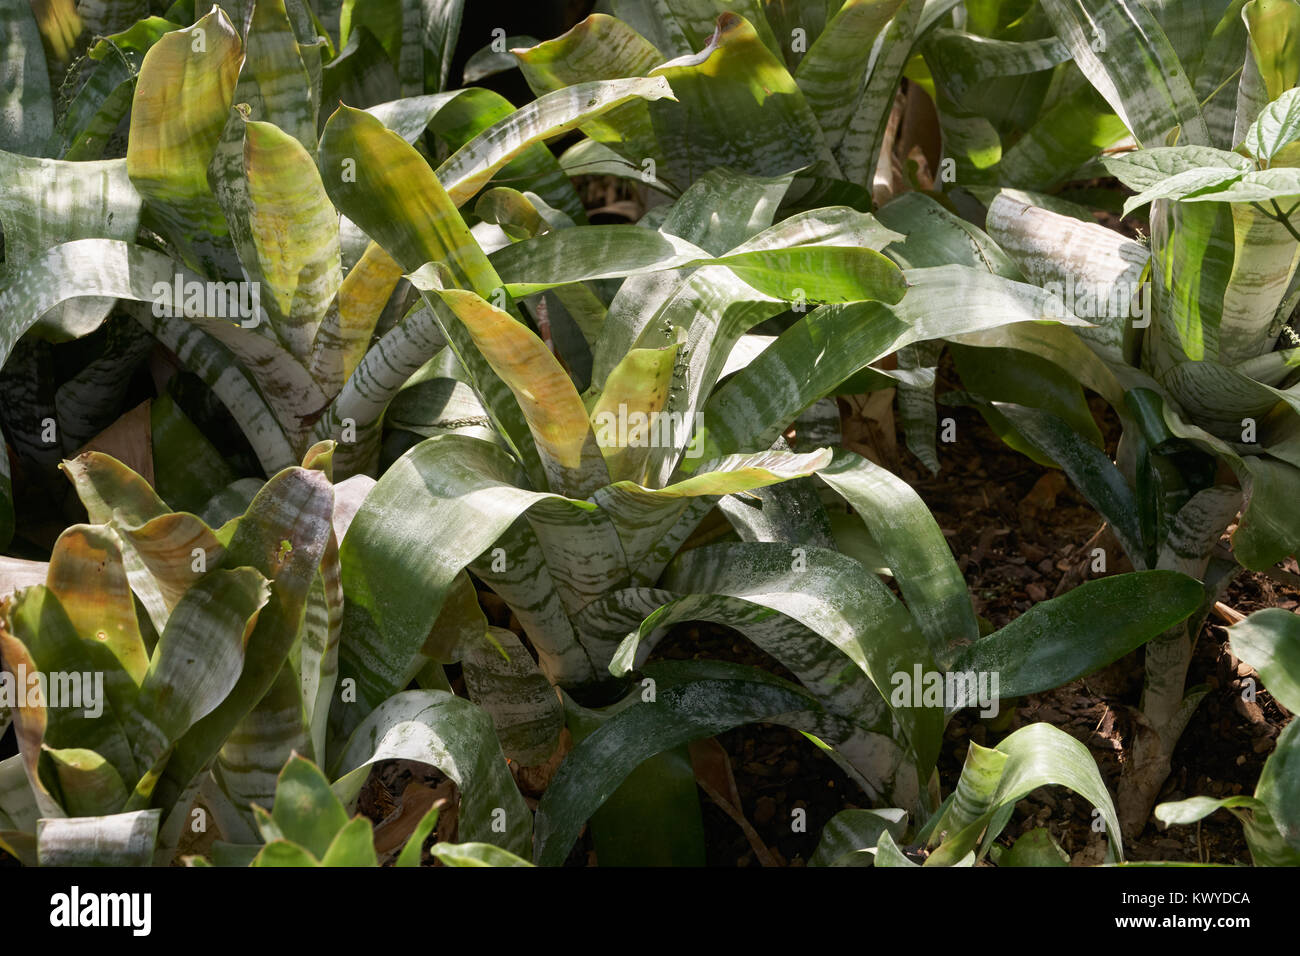 Aechmea fasciata which is a genus in botanical family Bromeliaceae. It has a distinctive shaped pink flower. Stock Photo